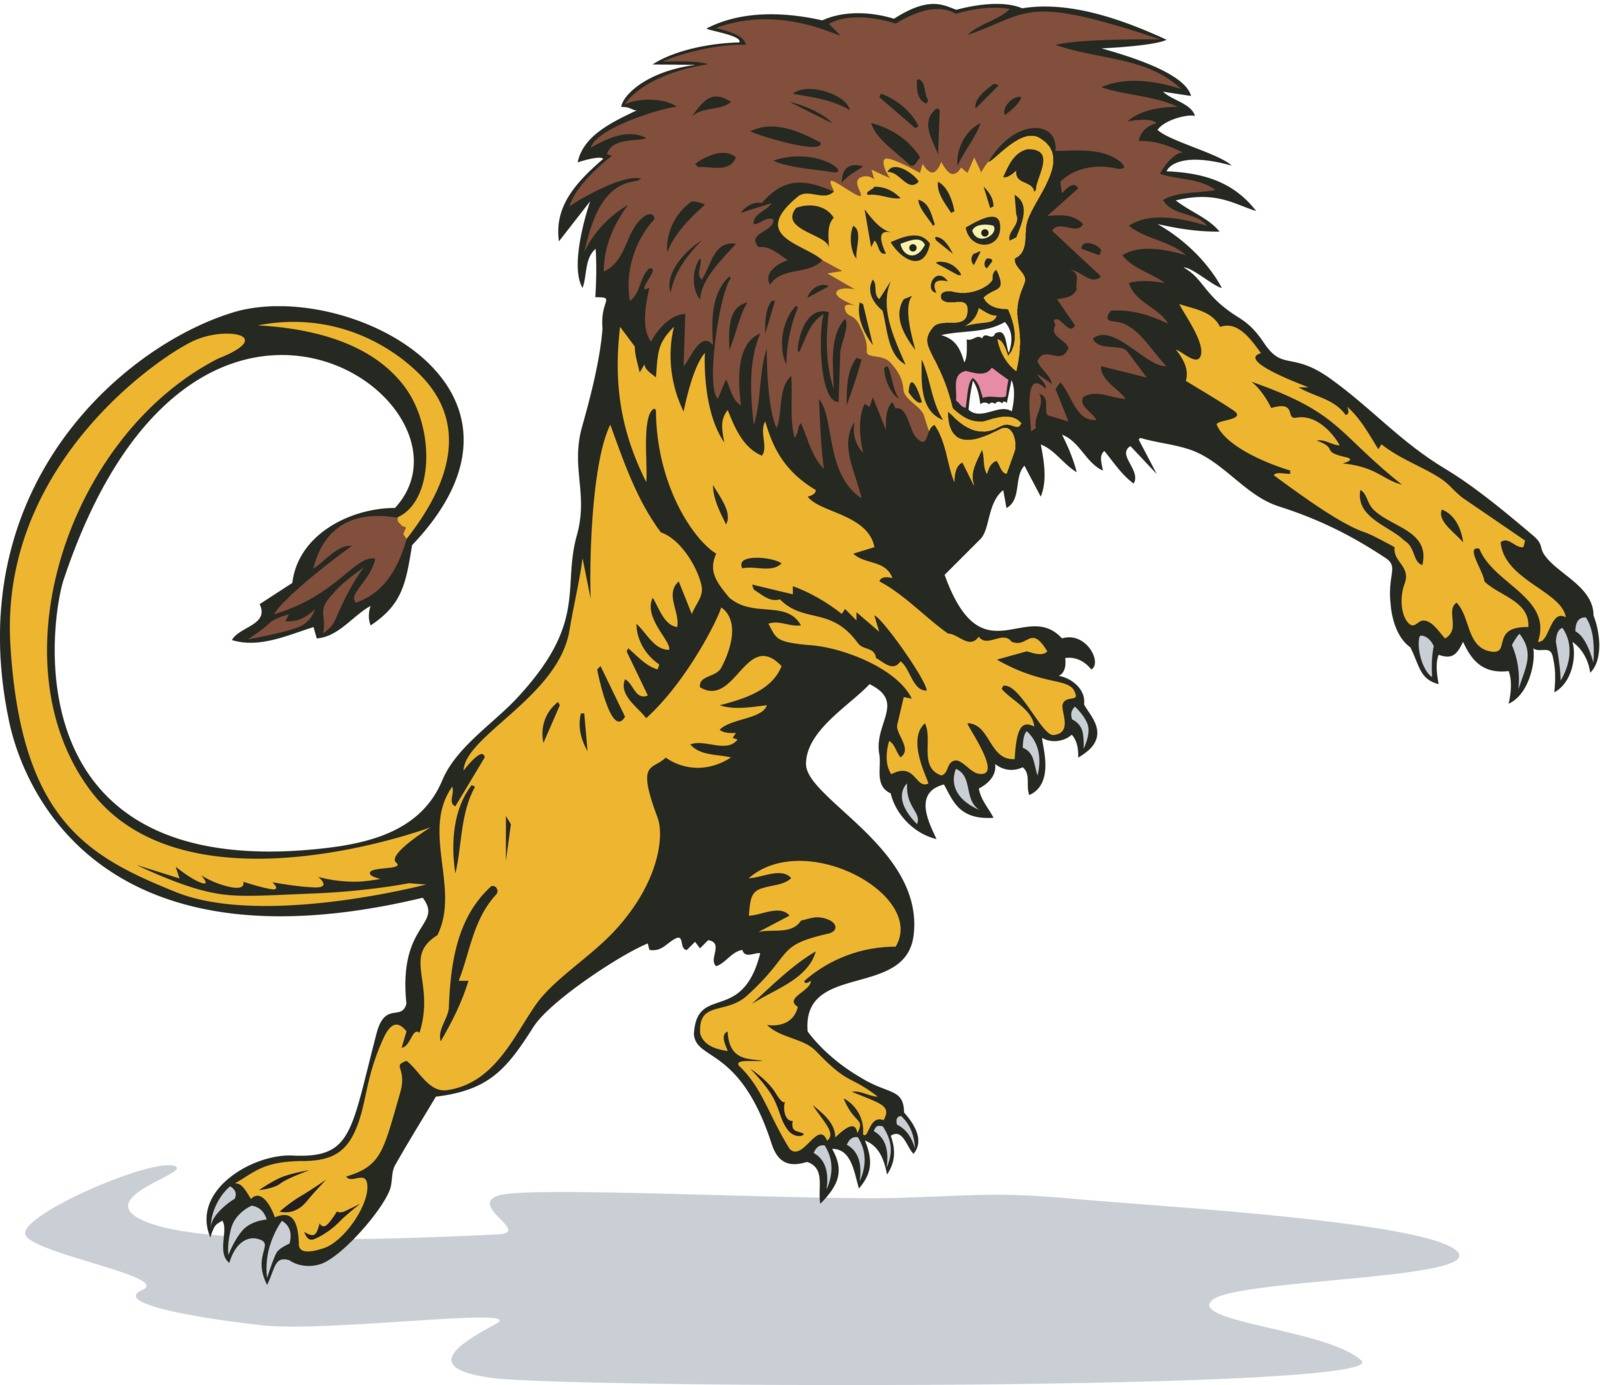 Illustration of a lion attacking done in retro style.